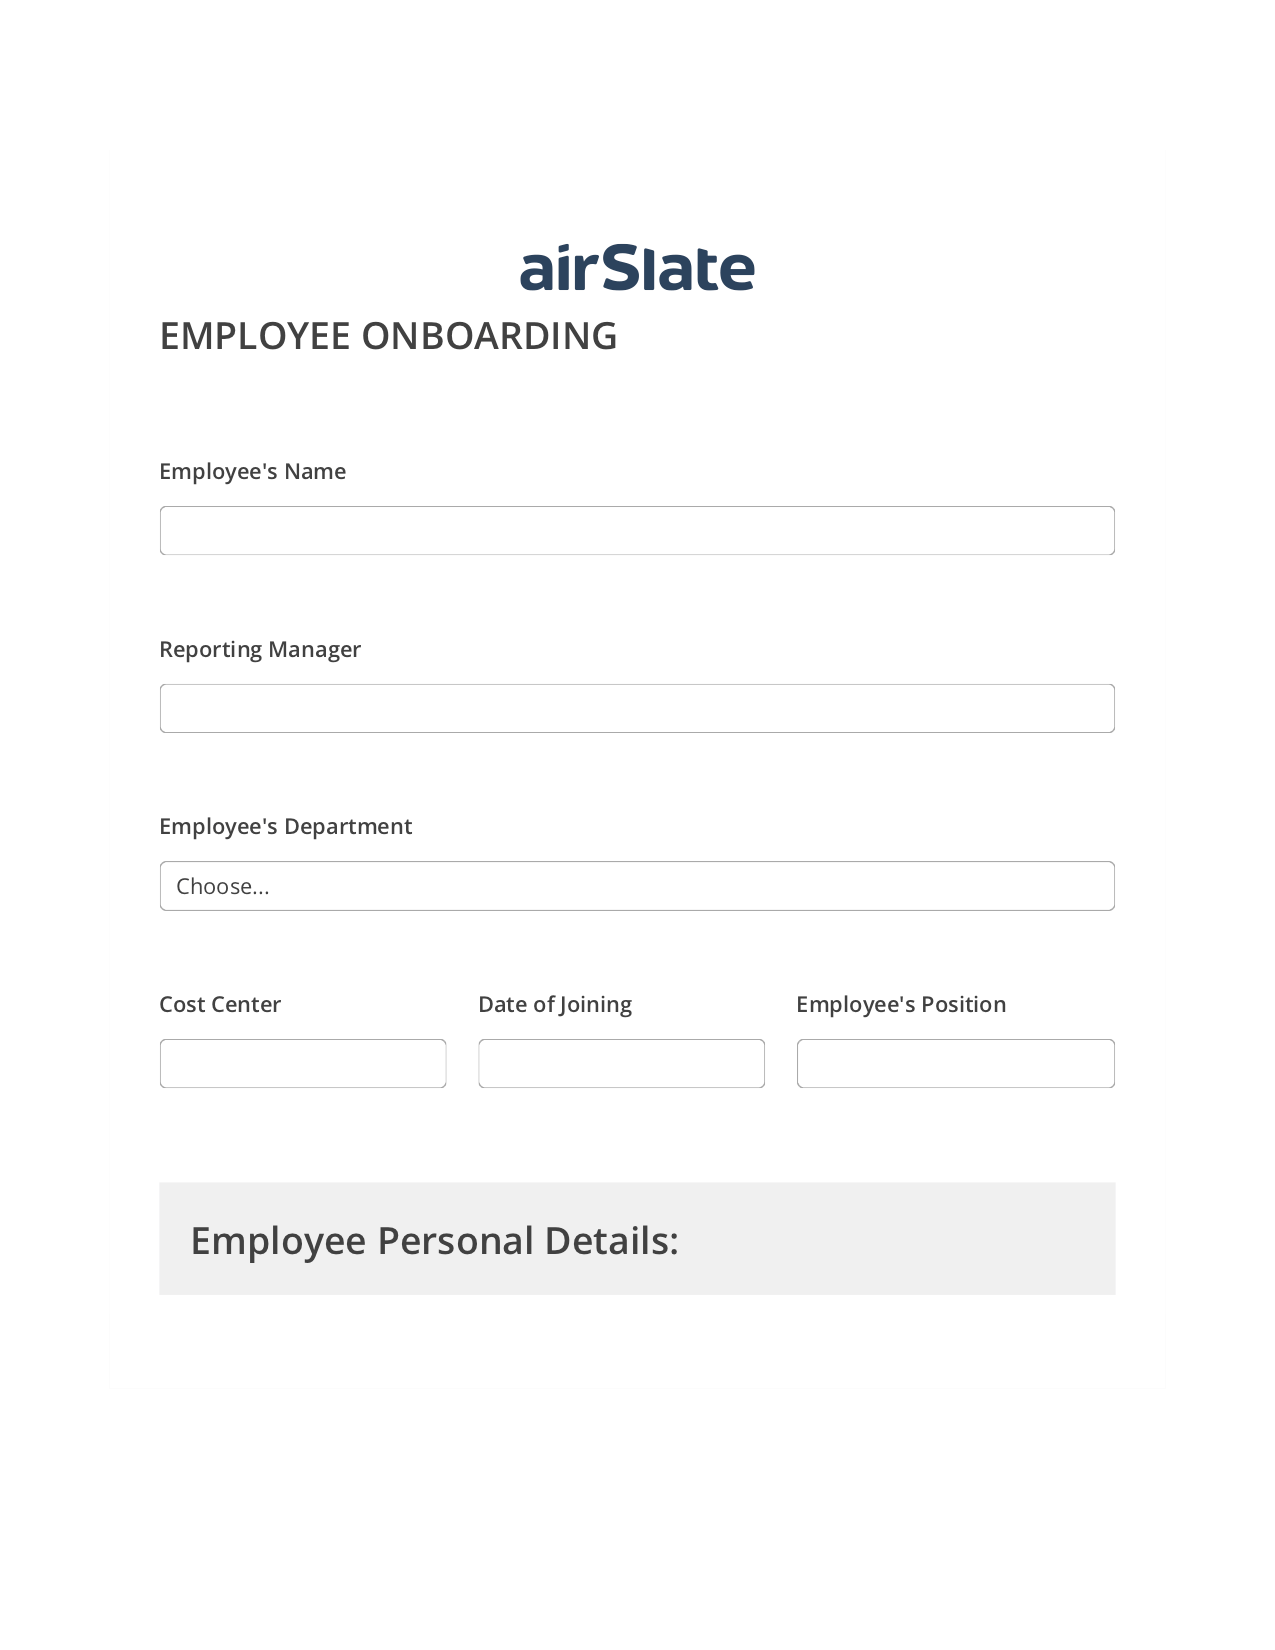 Employee Onboarding Workflow Pre-fill from Excel Spreadsheet Dropdown Options Bot, System Bot - Create a Slate in another Flow, Archive to Google Drive Bot